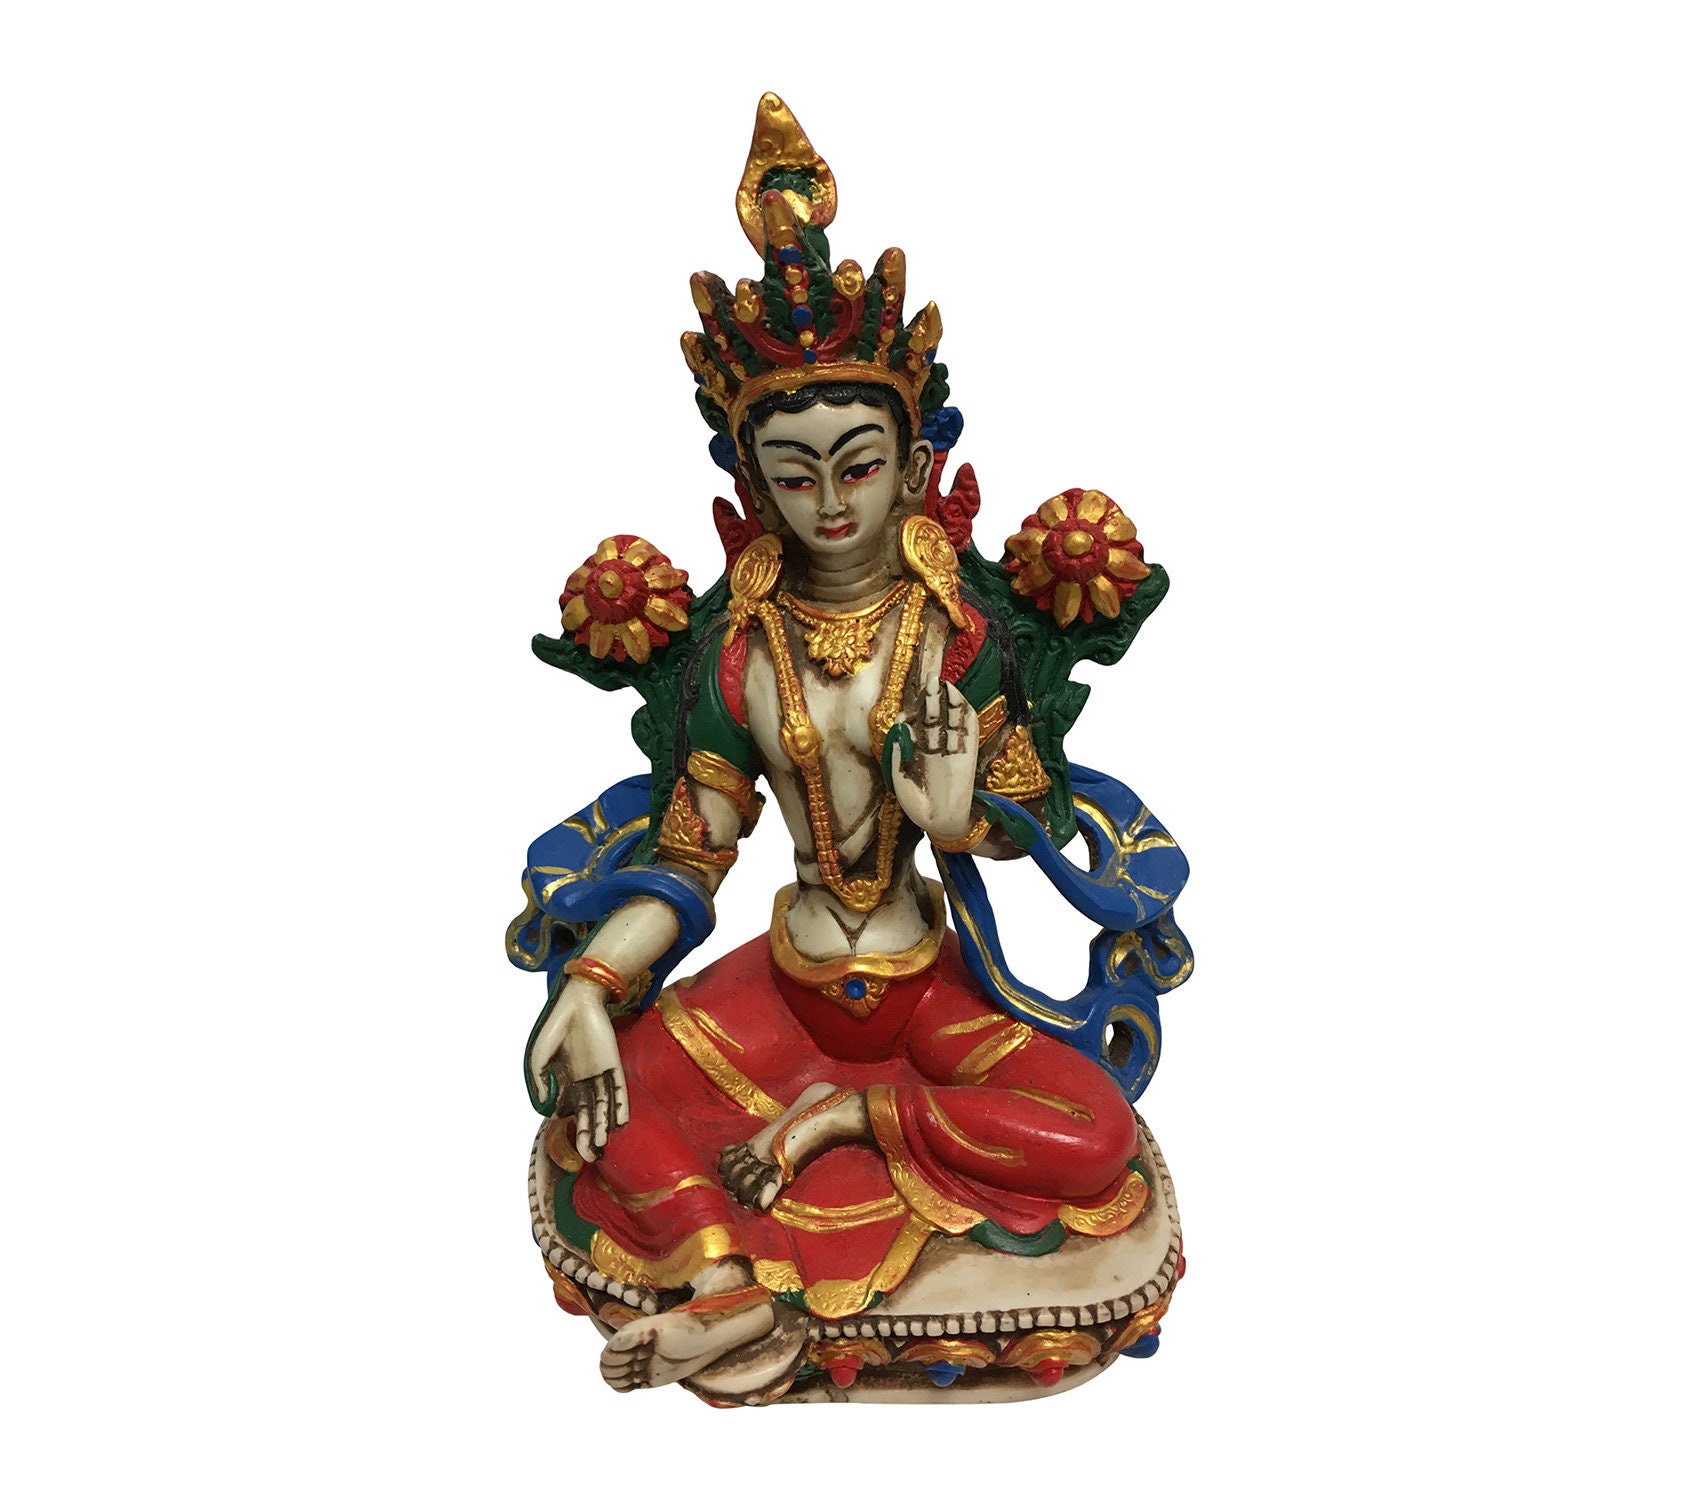 Buddhist Kuan Yin Quan Nian Resin Statue Female Buddha 7 inches Tall Goddess of Mercy and Compassion Sculpture 